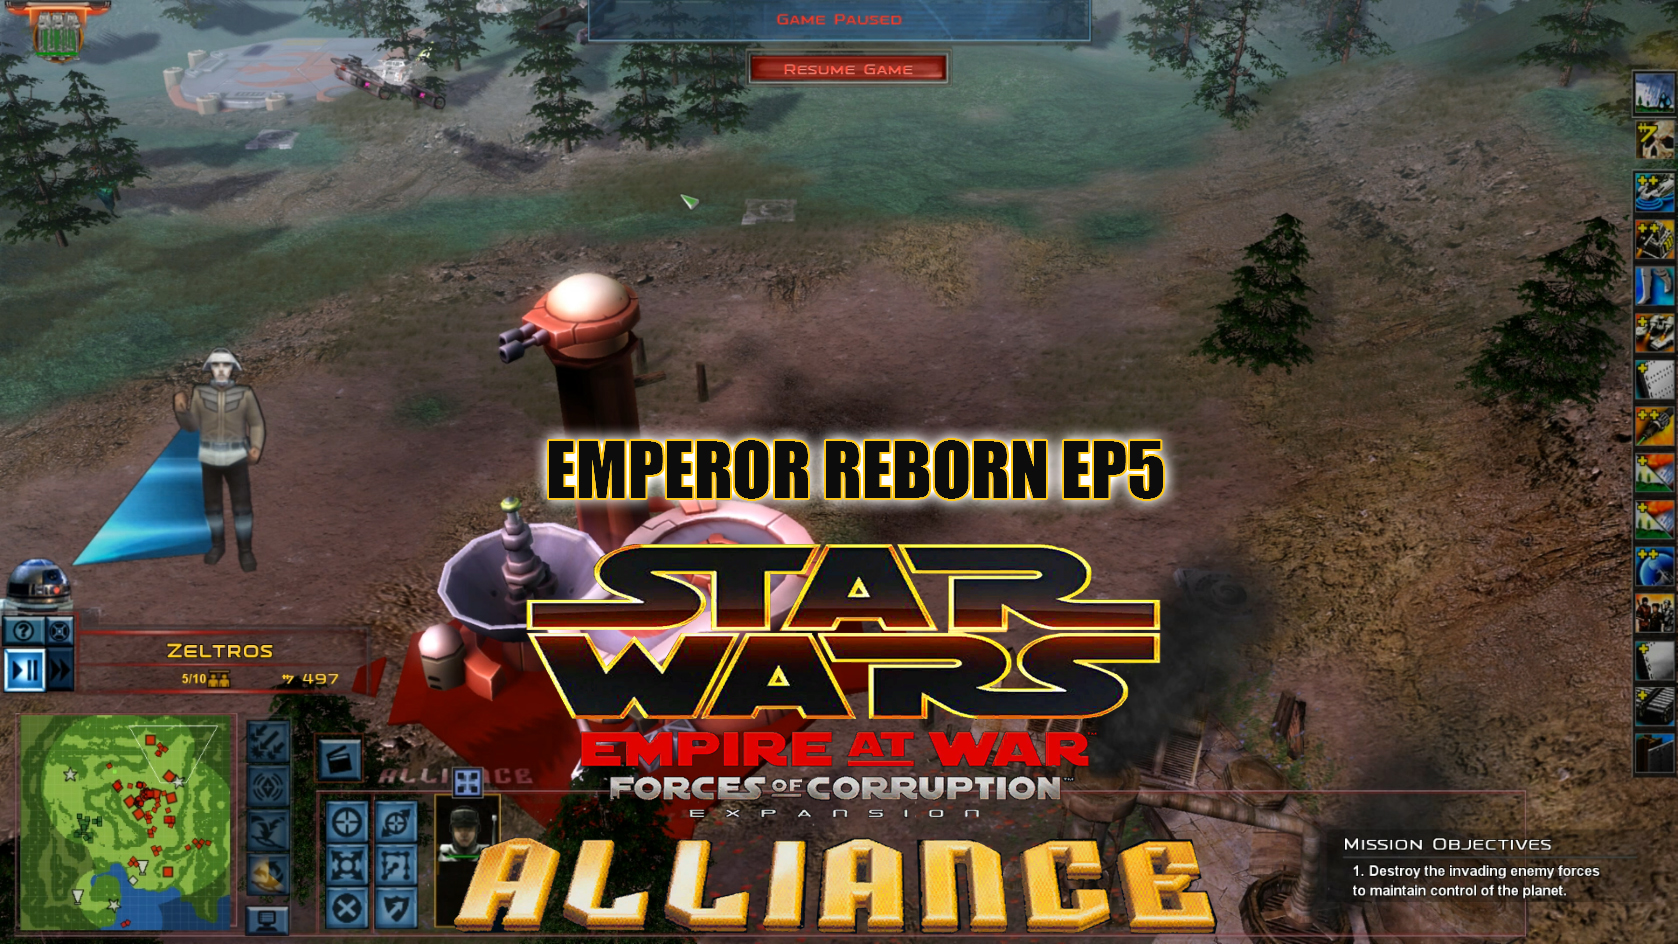 Star wars empire at war forces of corruption таблица cheat engine steam фото 115